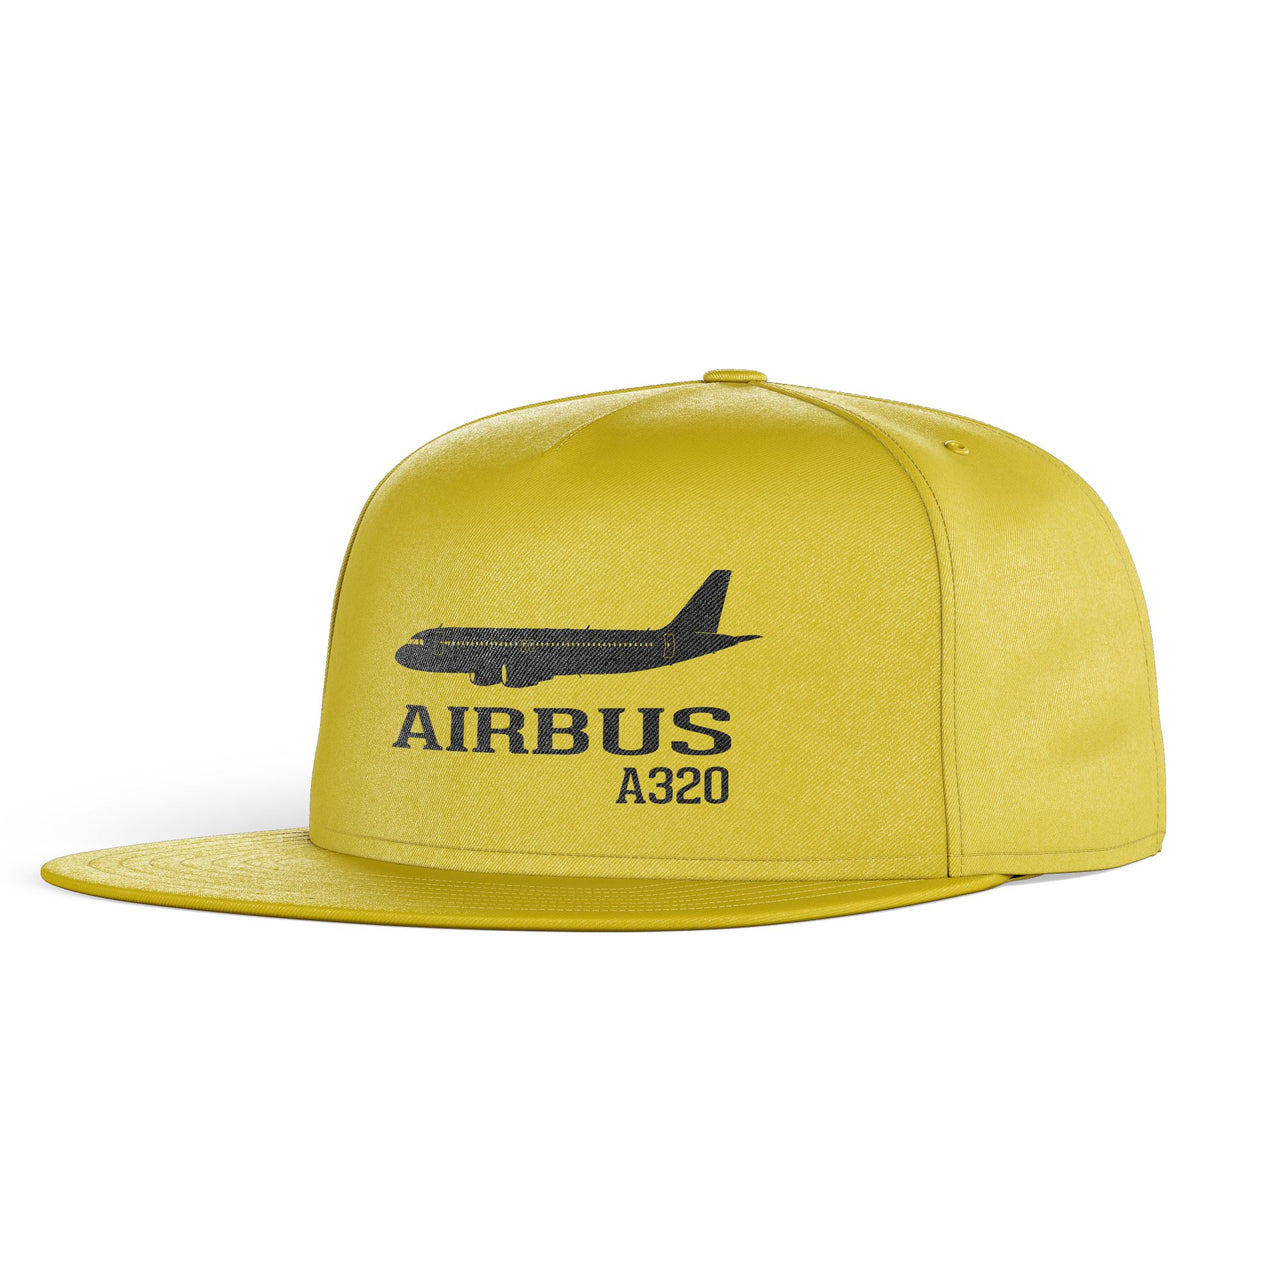 Airbus A320 Printed Designed Snapback Caps & Hats